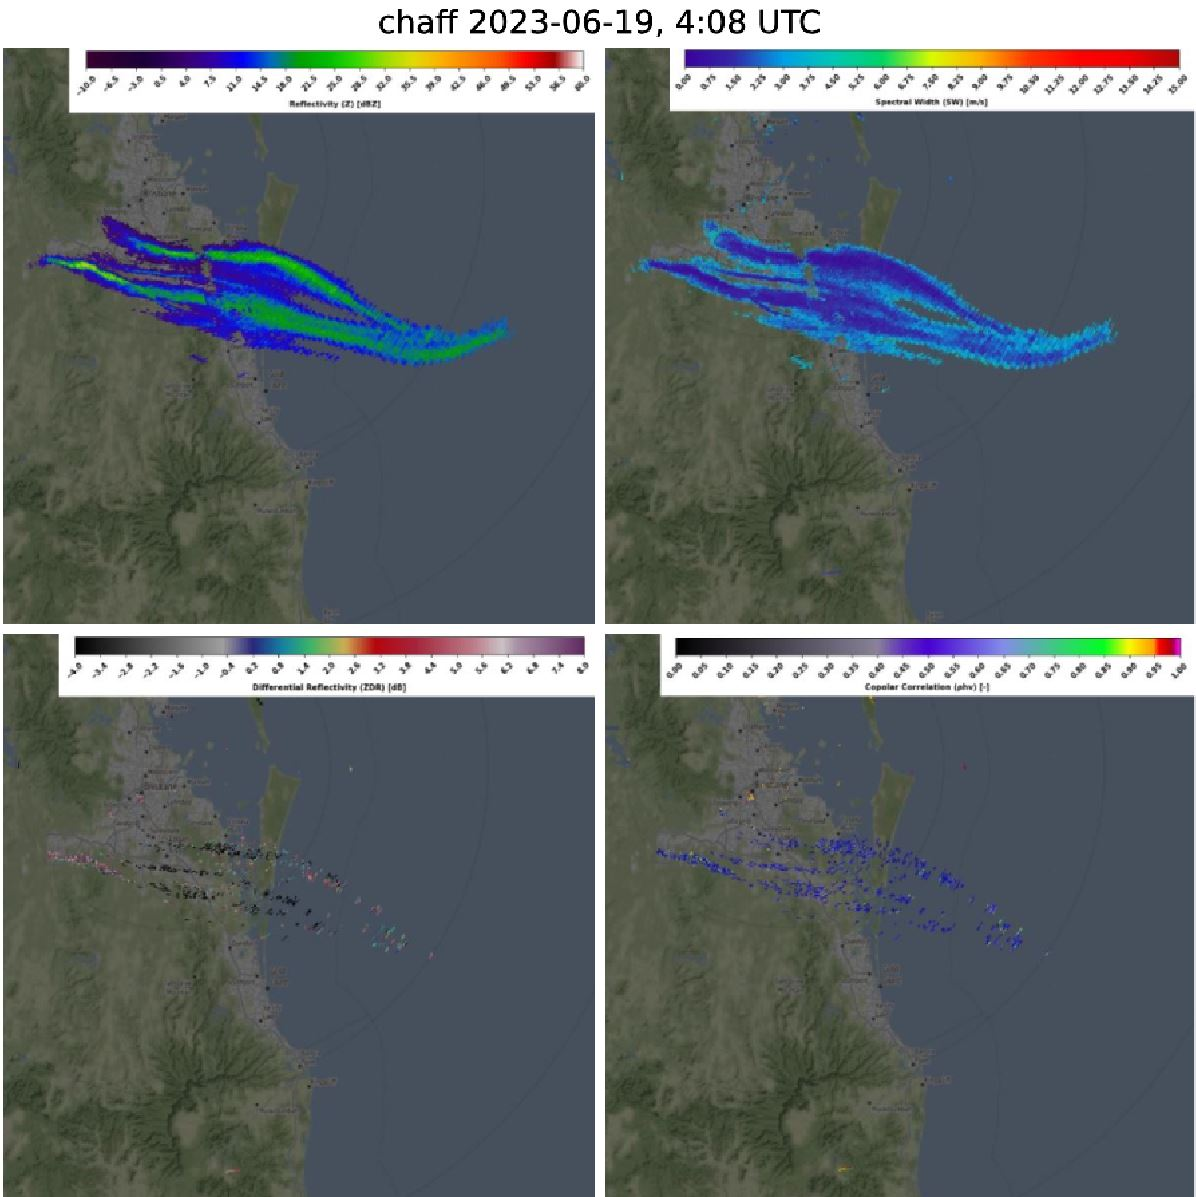 One Solid Year - Year in life of Brisbane Solid State Radar